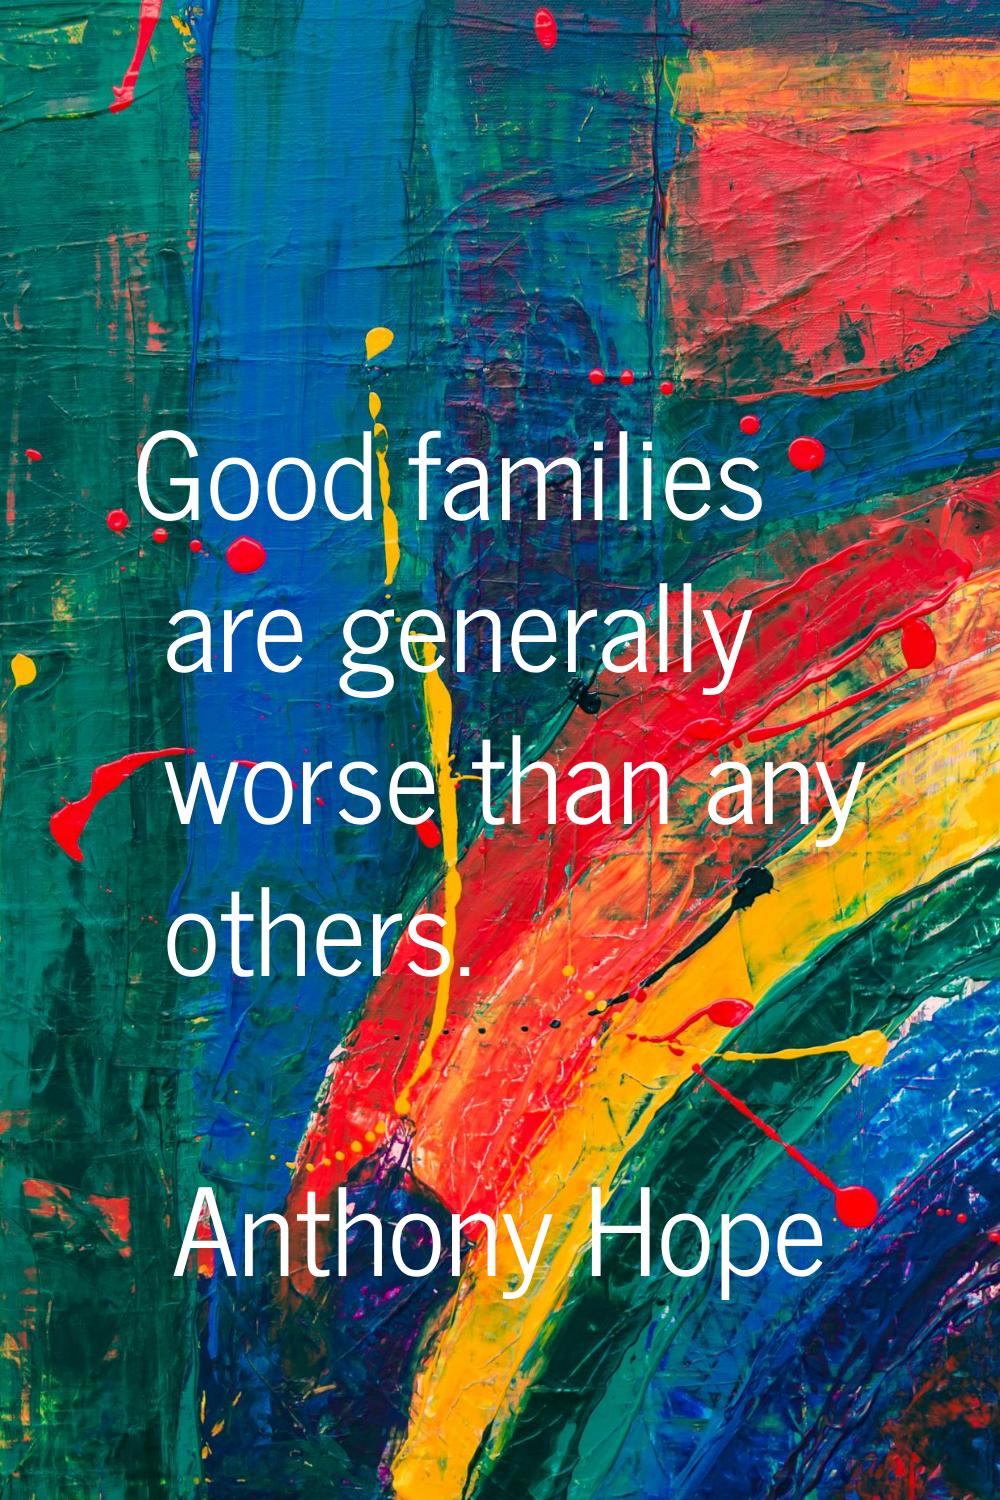 Good families are generally worse than any others.